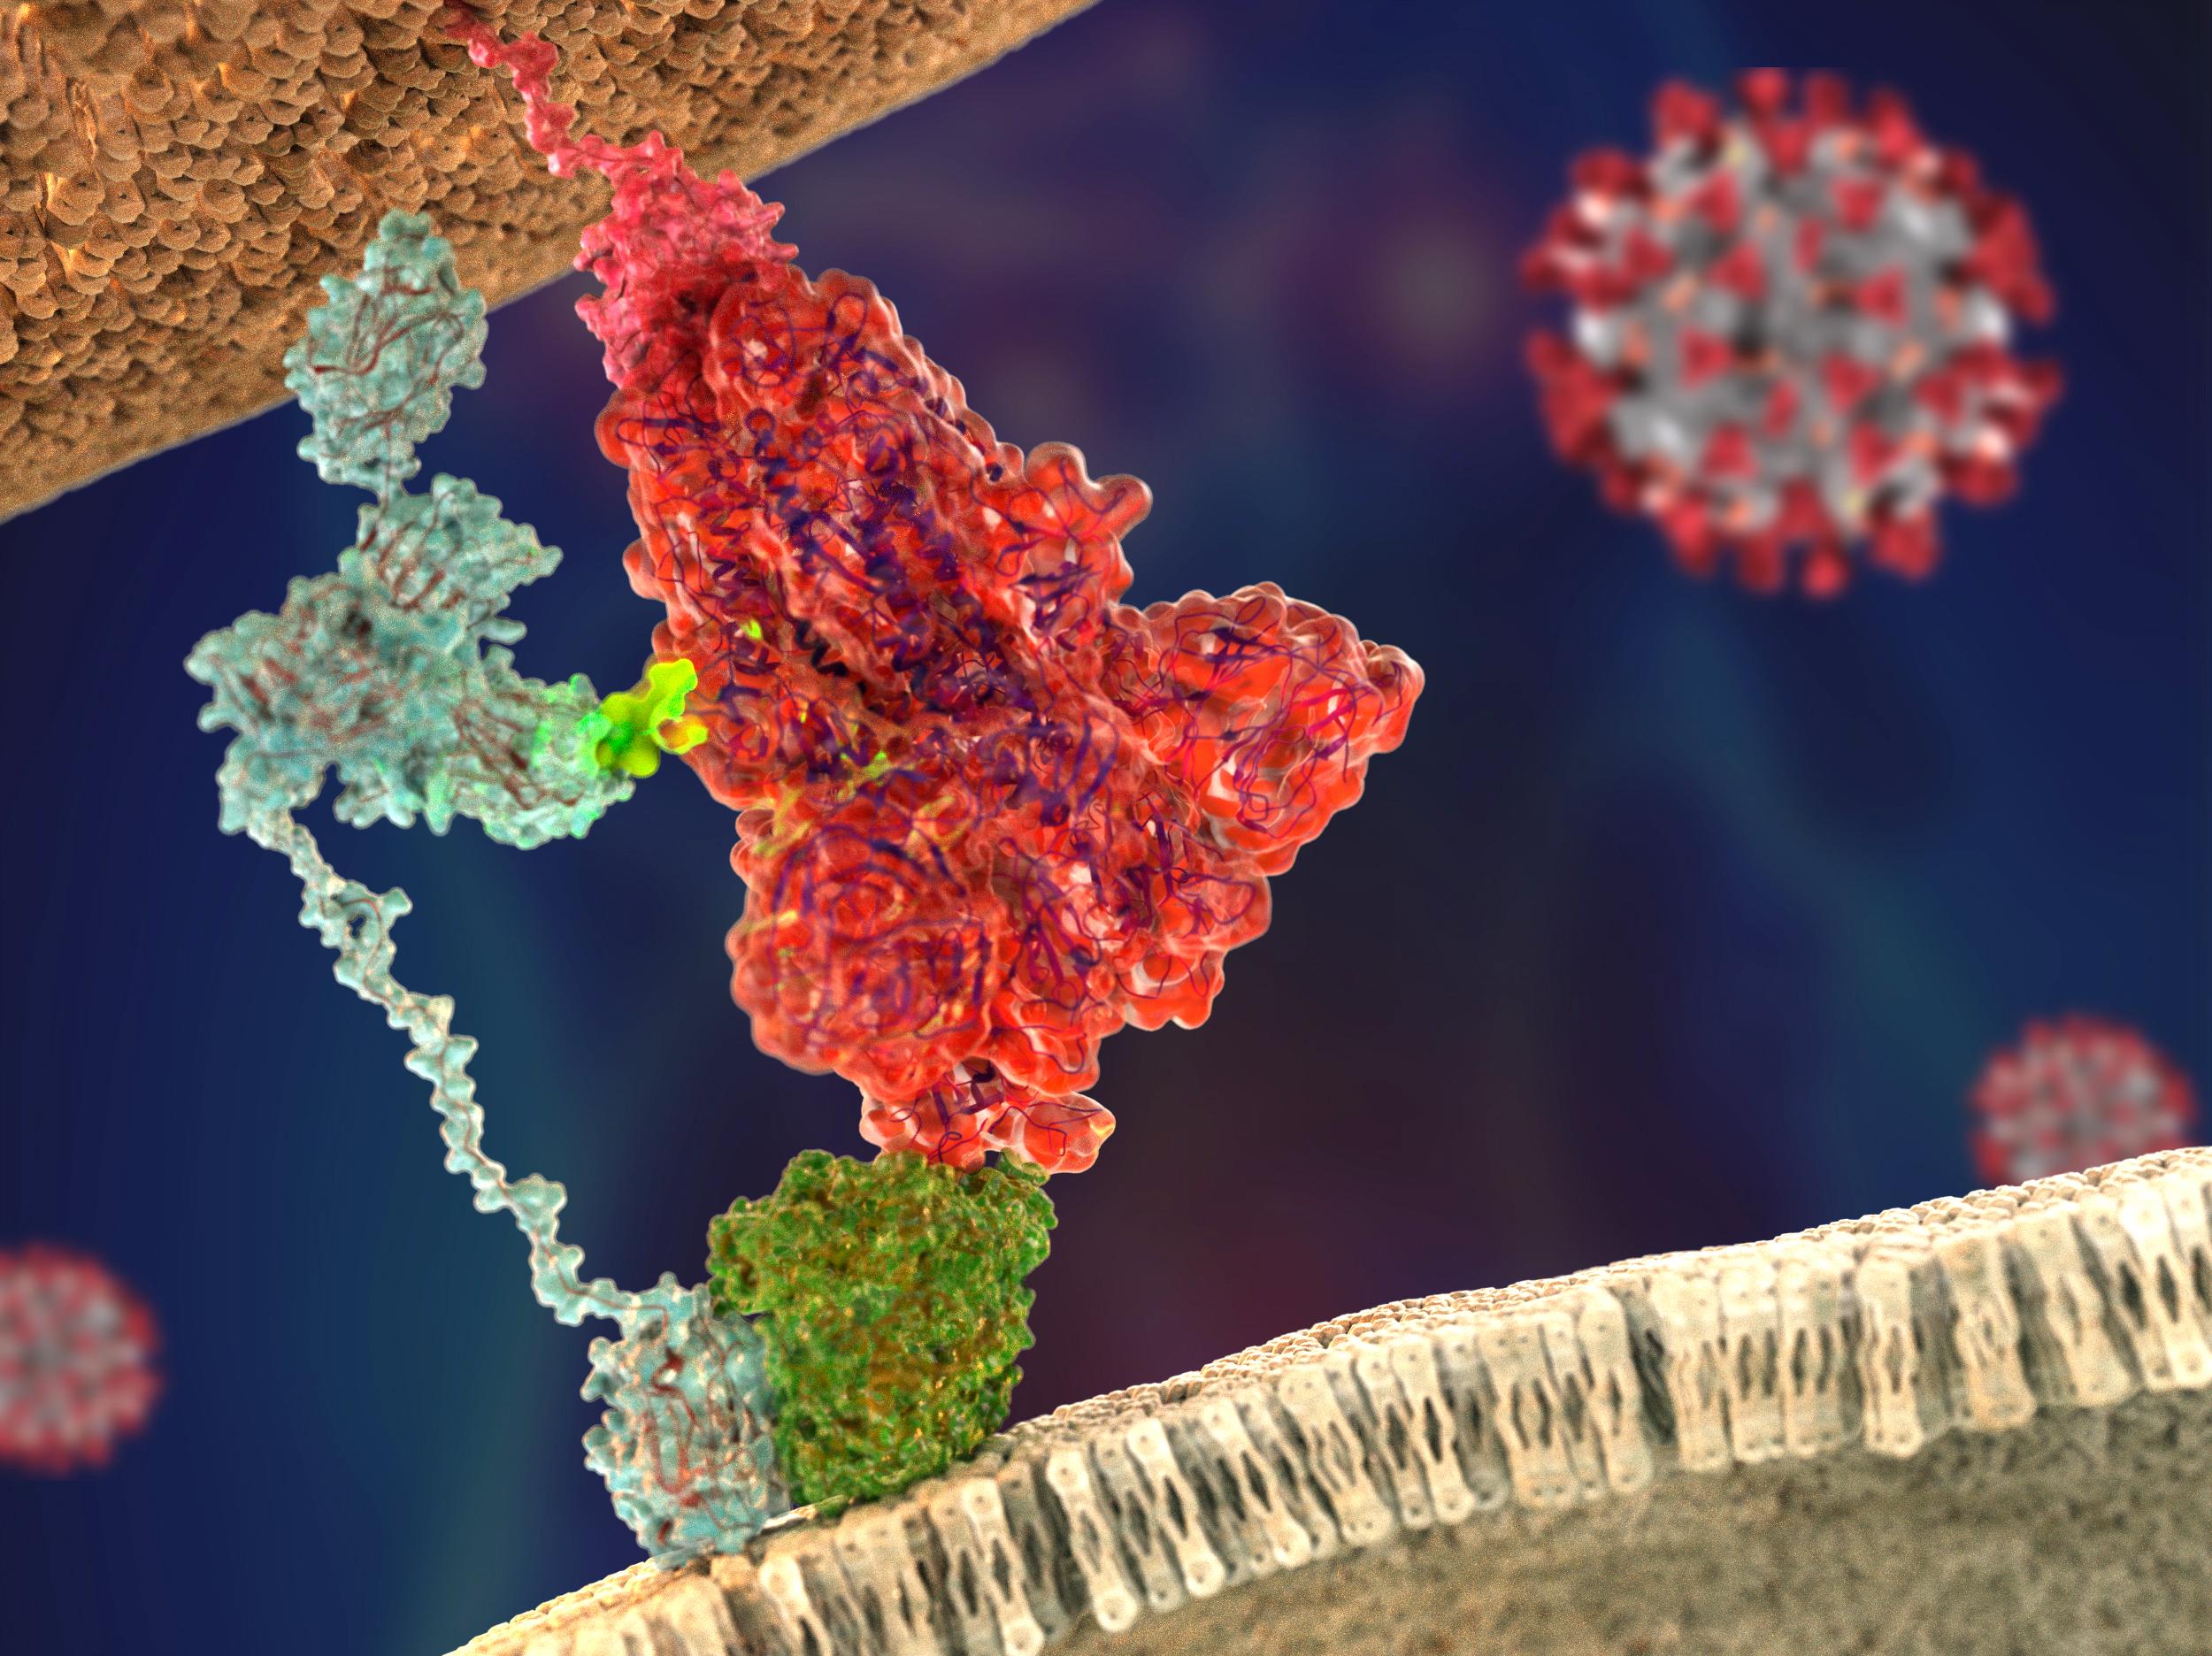 Cover image of Neuropilin-1 drives SARS-CoV-2 infectivity, finds breakthrough study